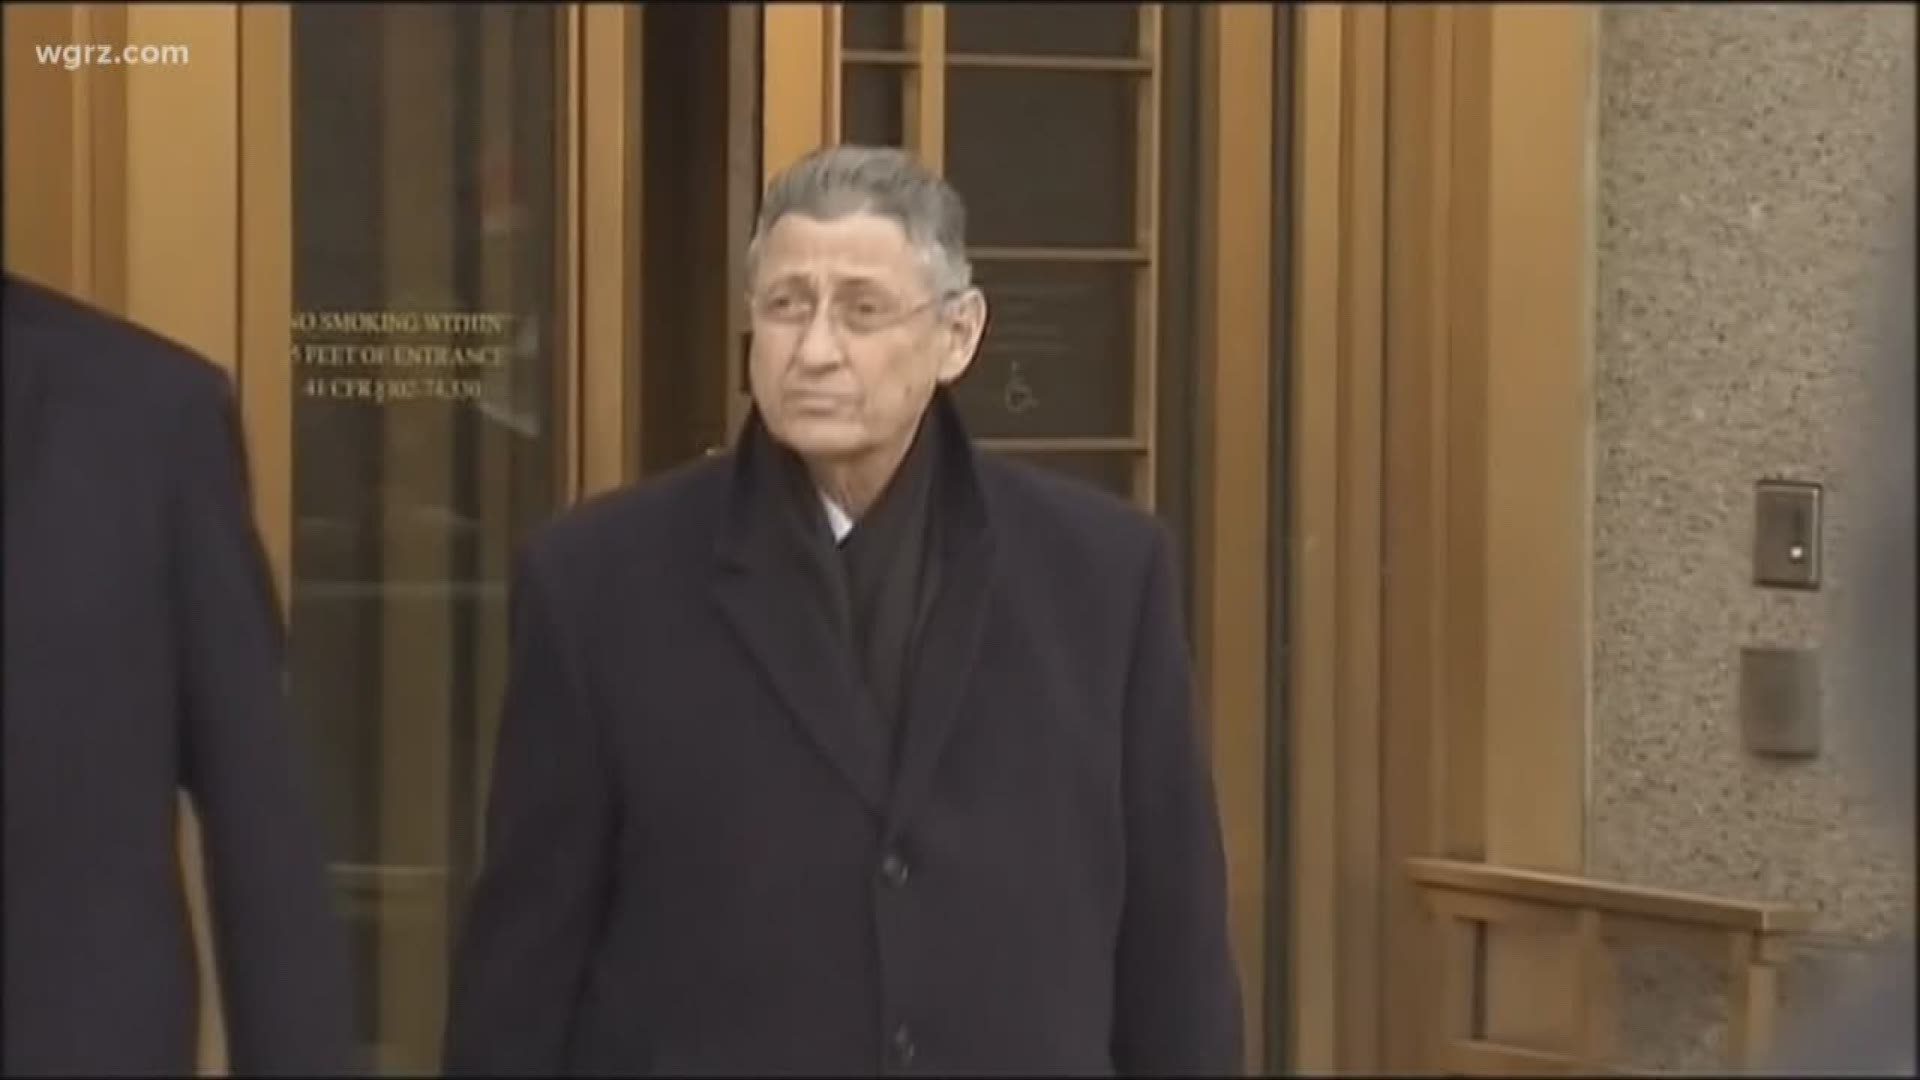 New bribery trial for Sheldon Silver starts Monday